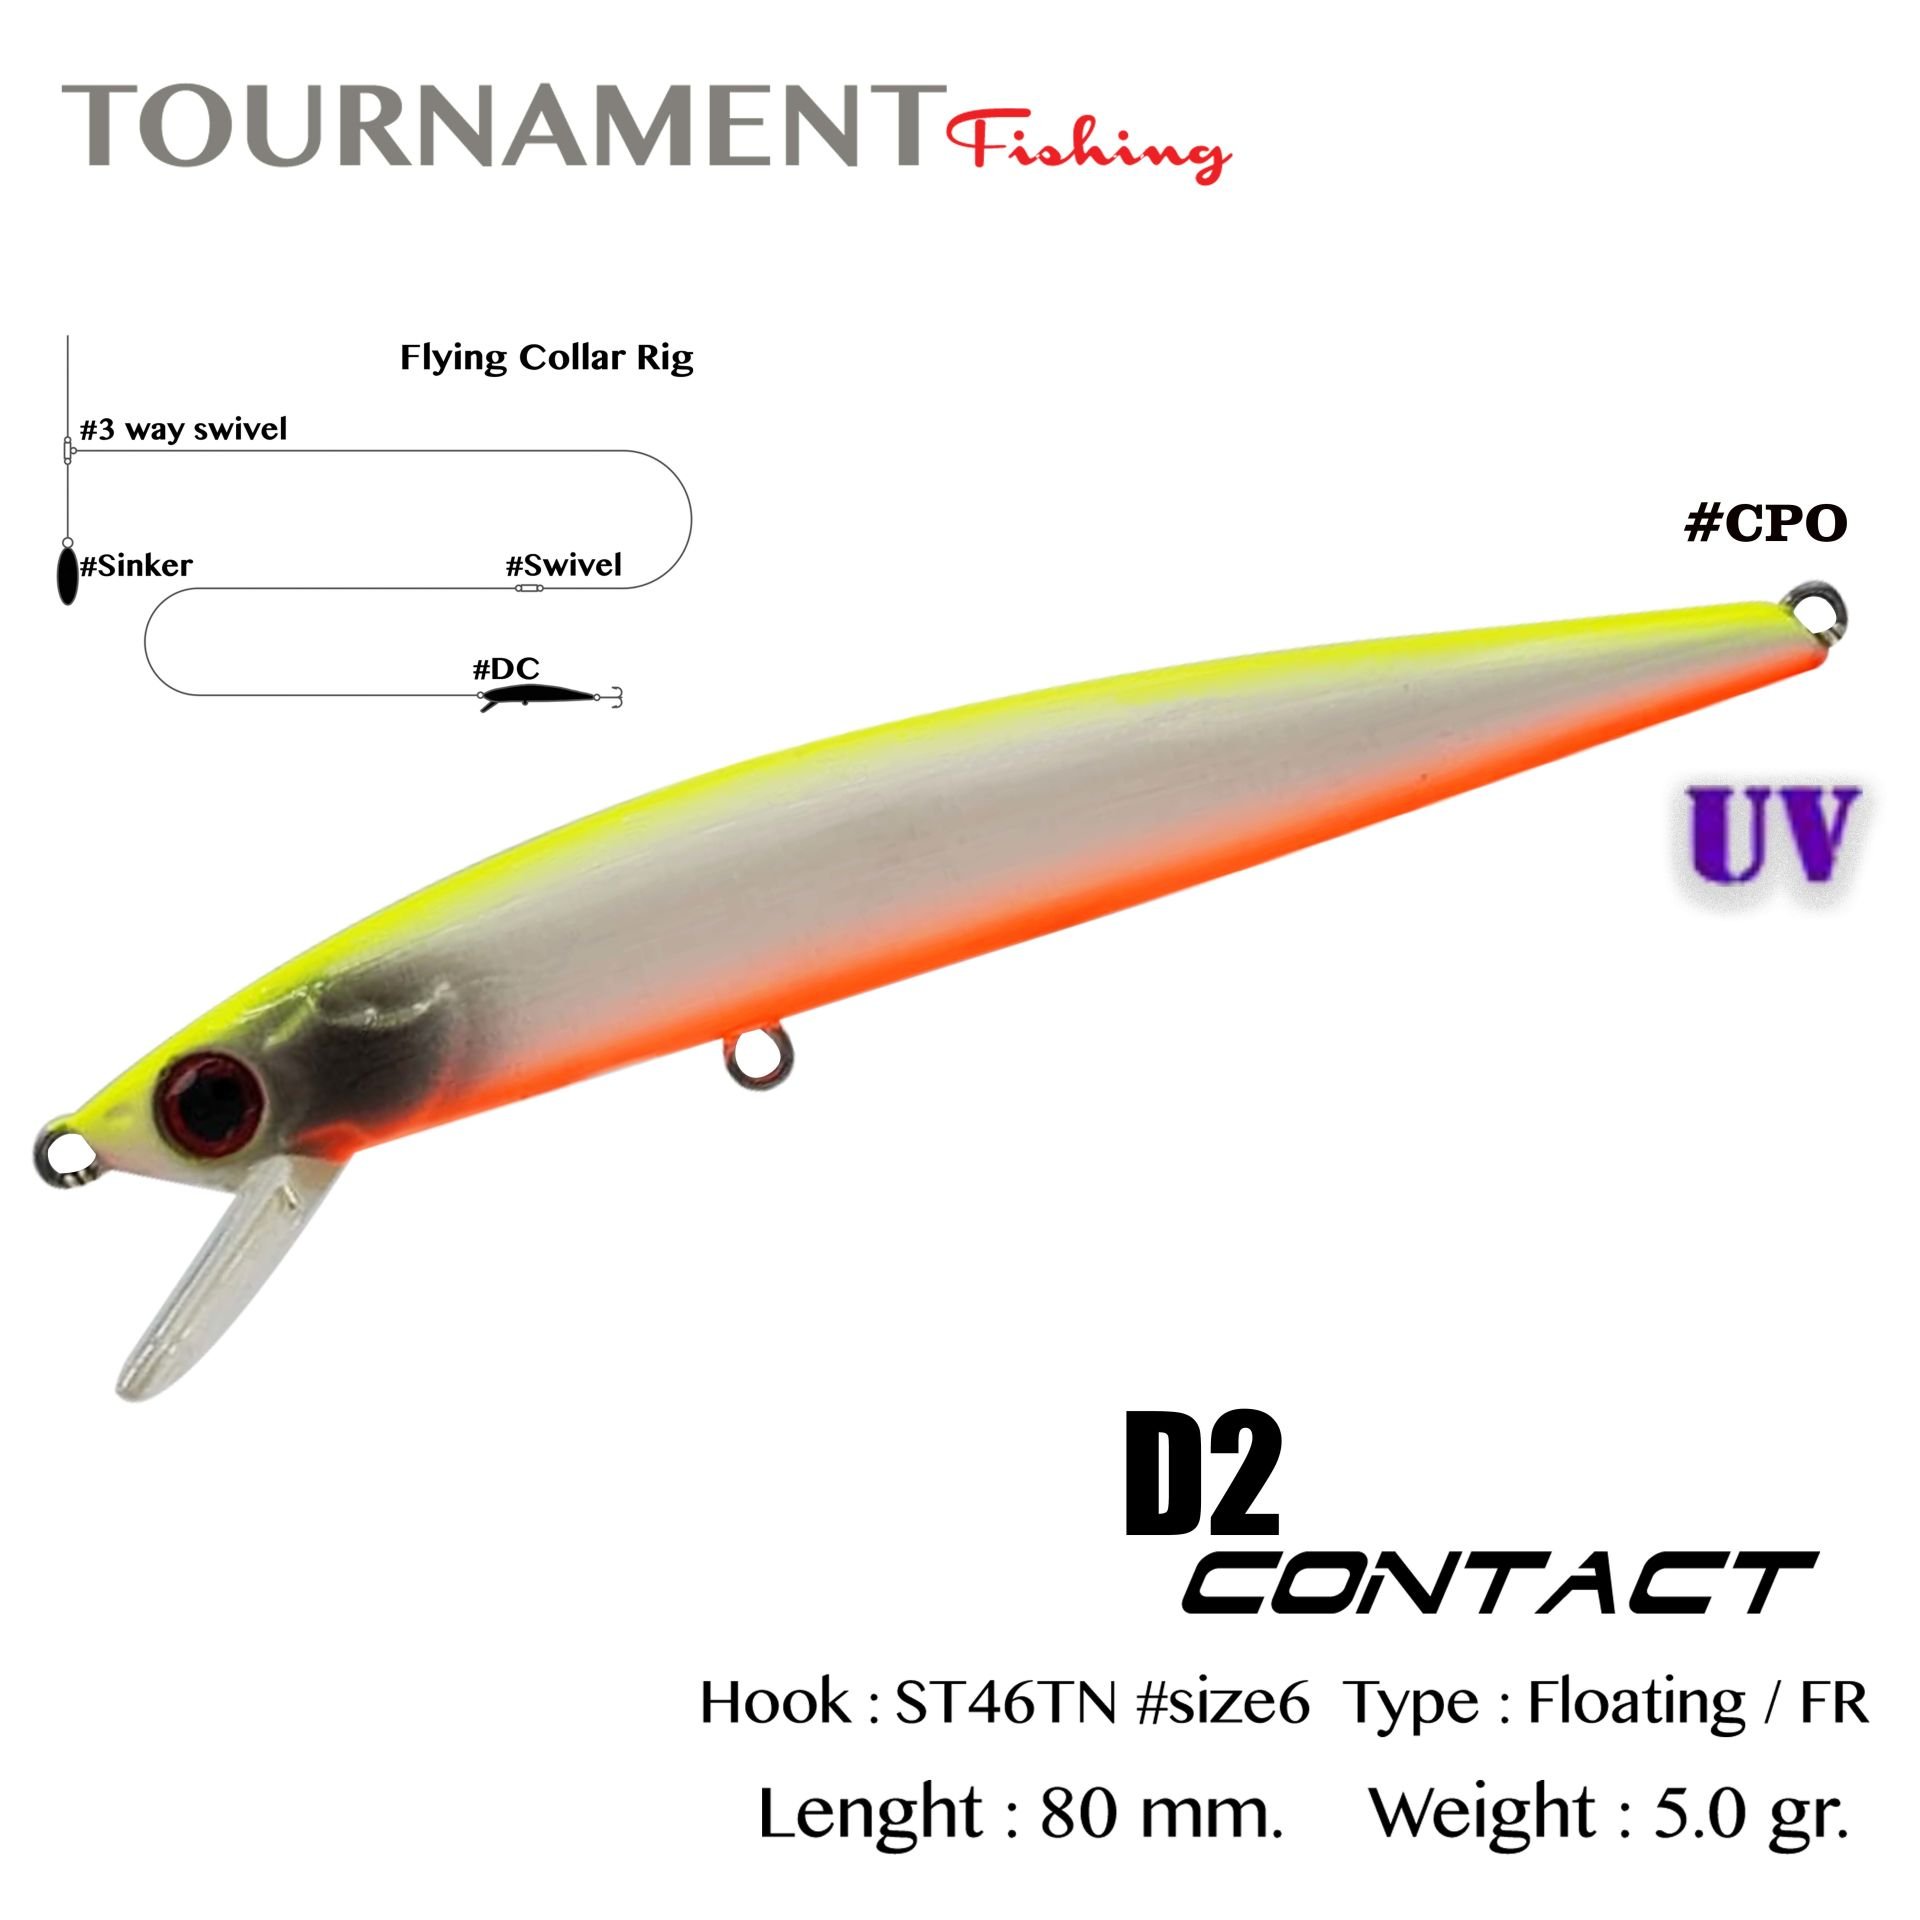 Tournament fishing D2 Contact 80 F 80 mm 5 gr #CPO